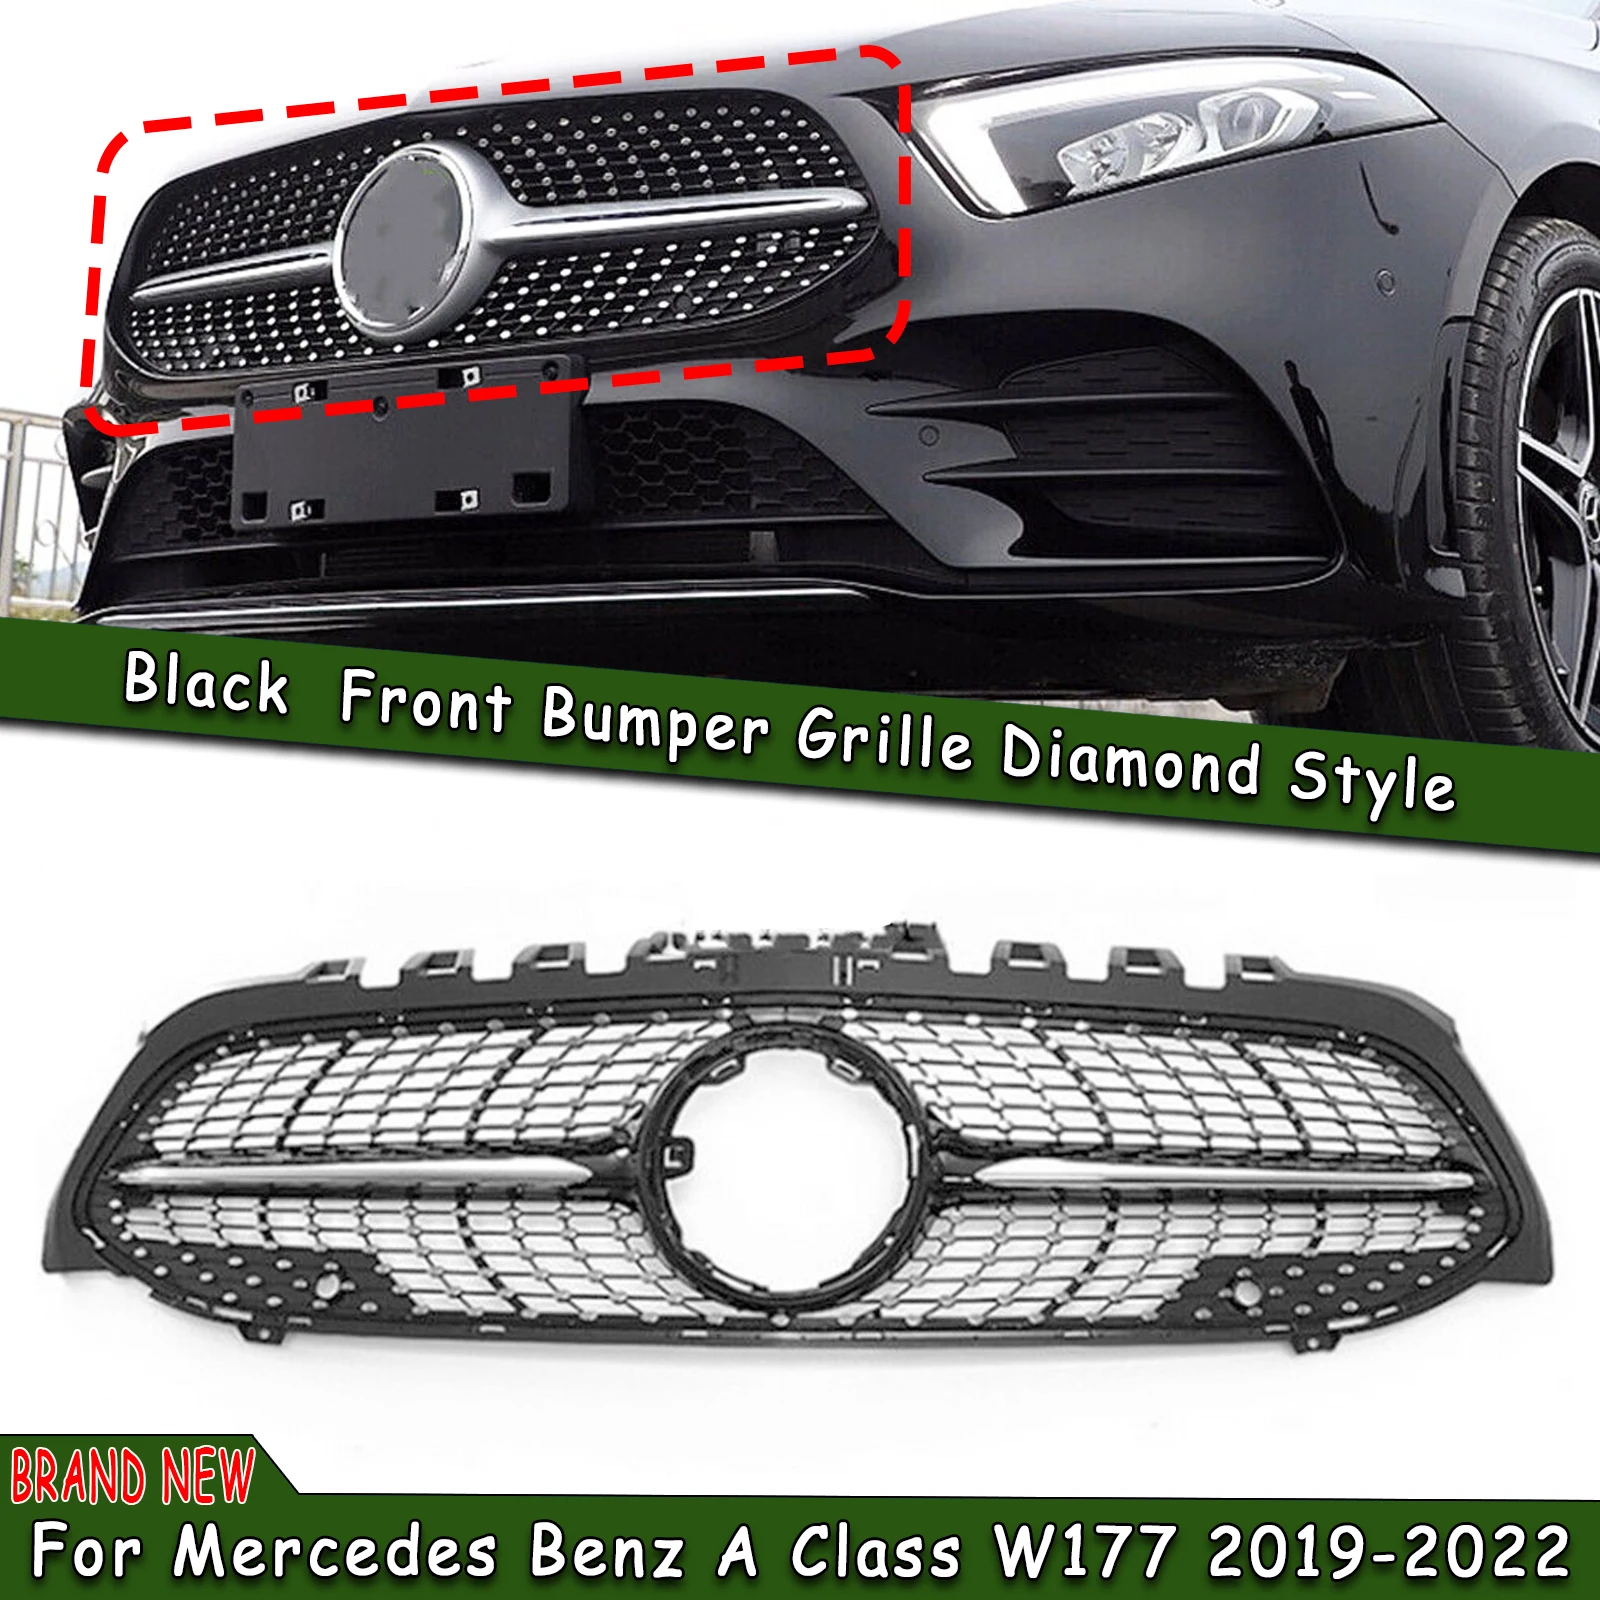 

Front Grille Grill Diamond Style Car Upper Bumper Hood Mesh Grid For Mercedes Benz A Class W177 A180 A200 A250 A45 AMG 2019-2022